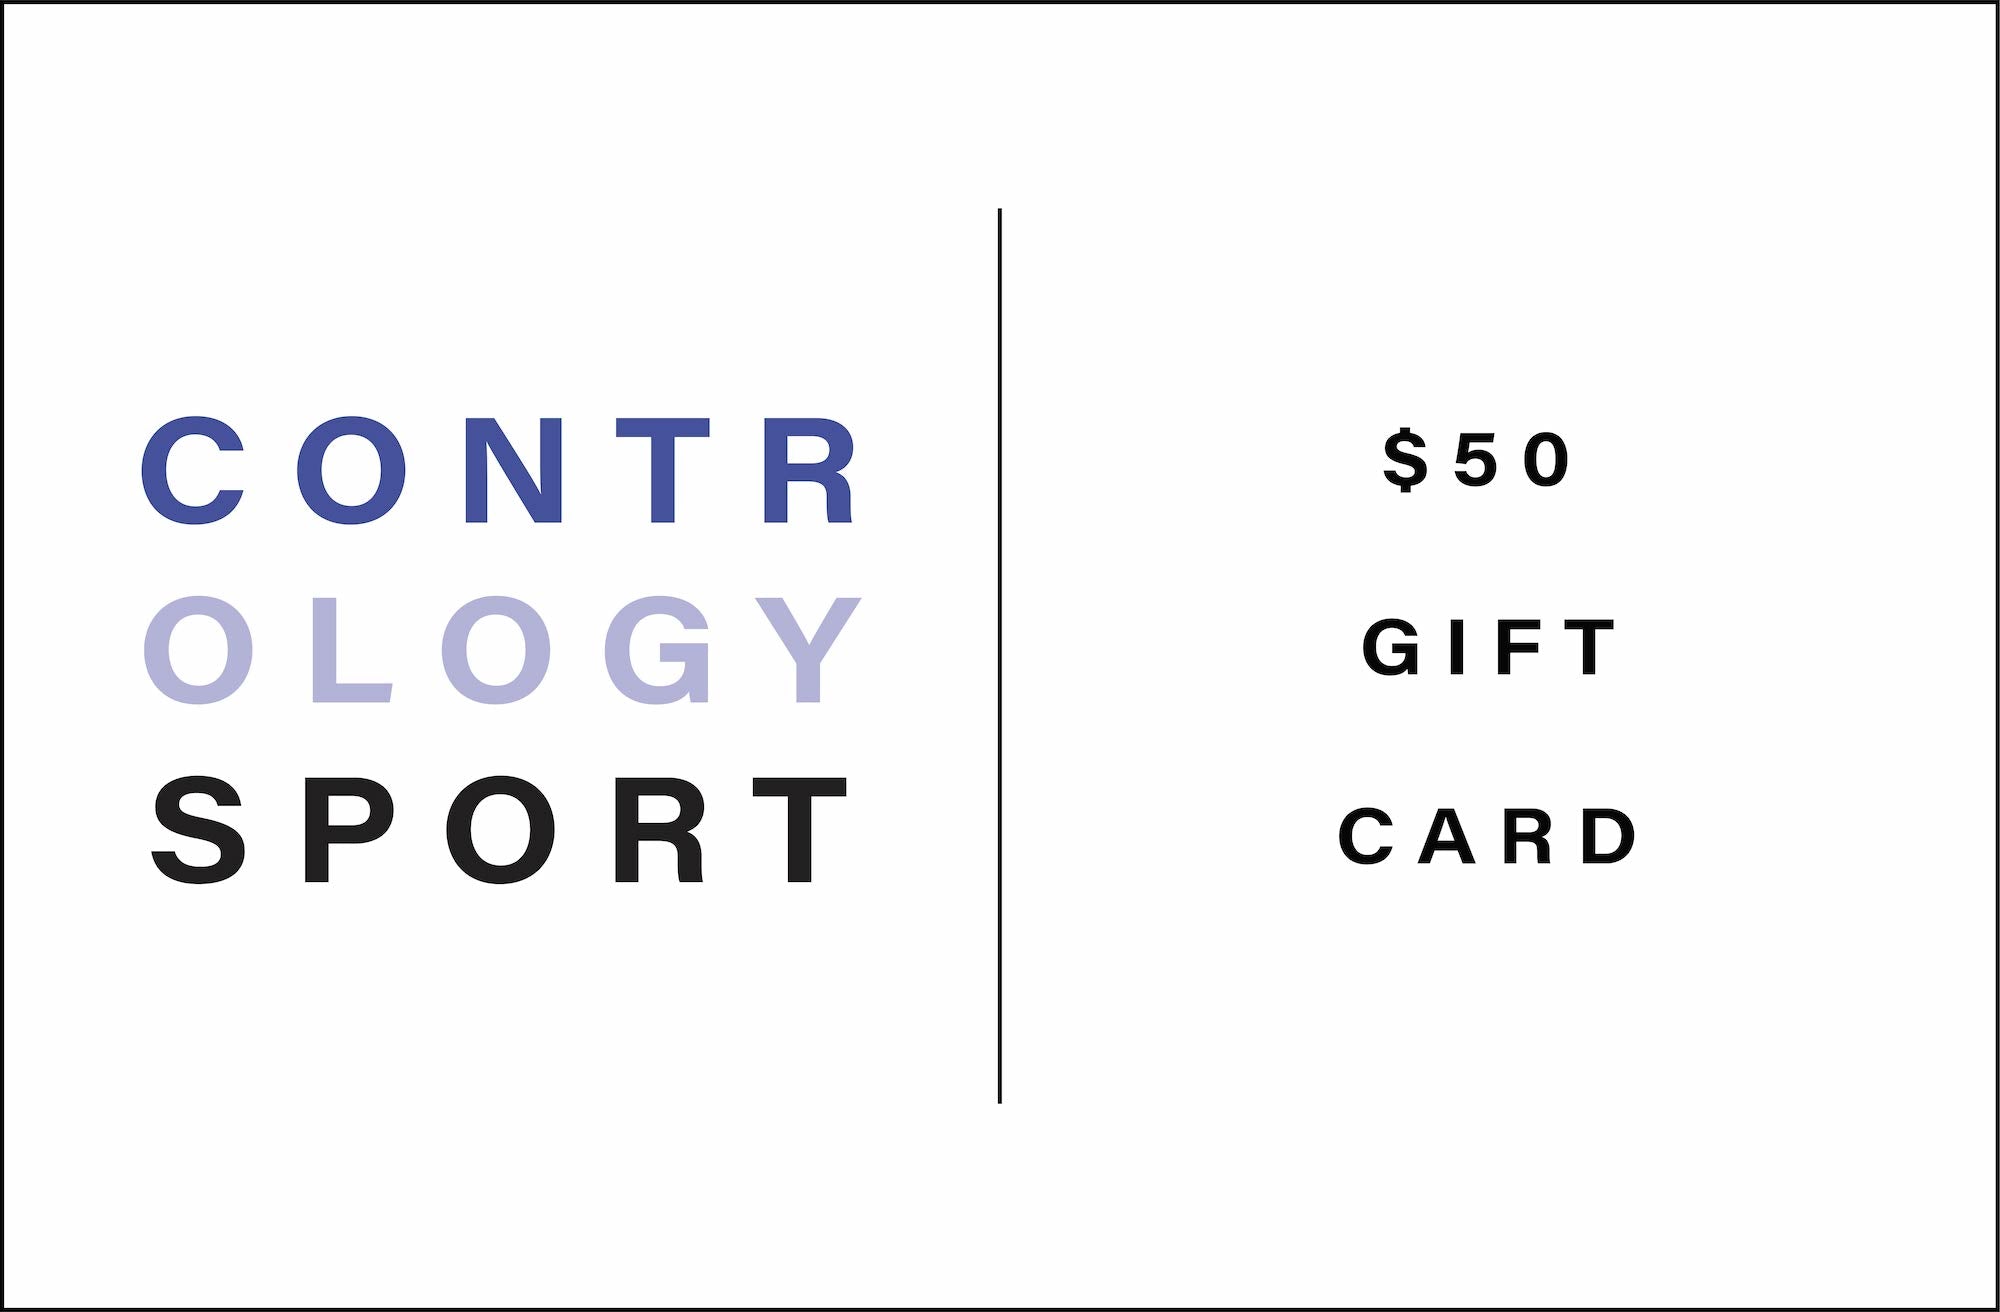 Contrology Gift Card